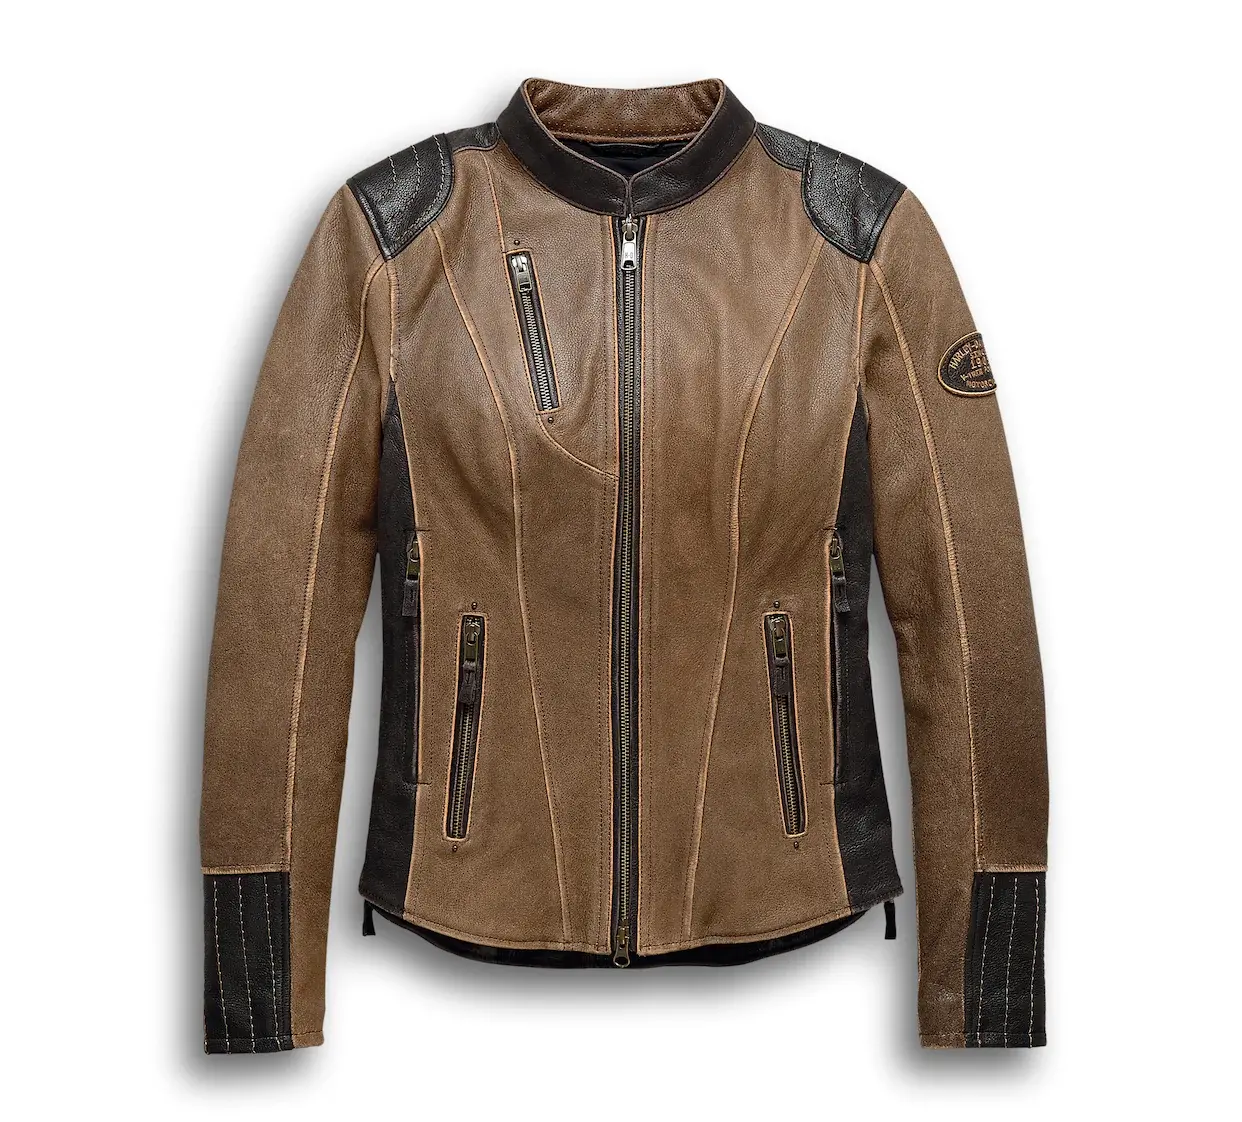 Bikers fashion women leather jacket soft cowhide Leather American Club and group riders Autos Motorcycle Riding Cruising Jackets